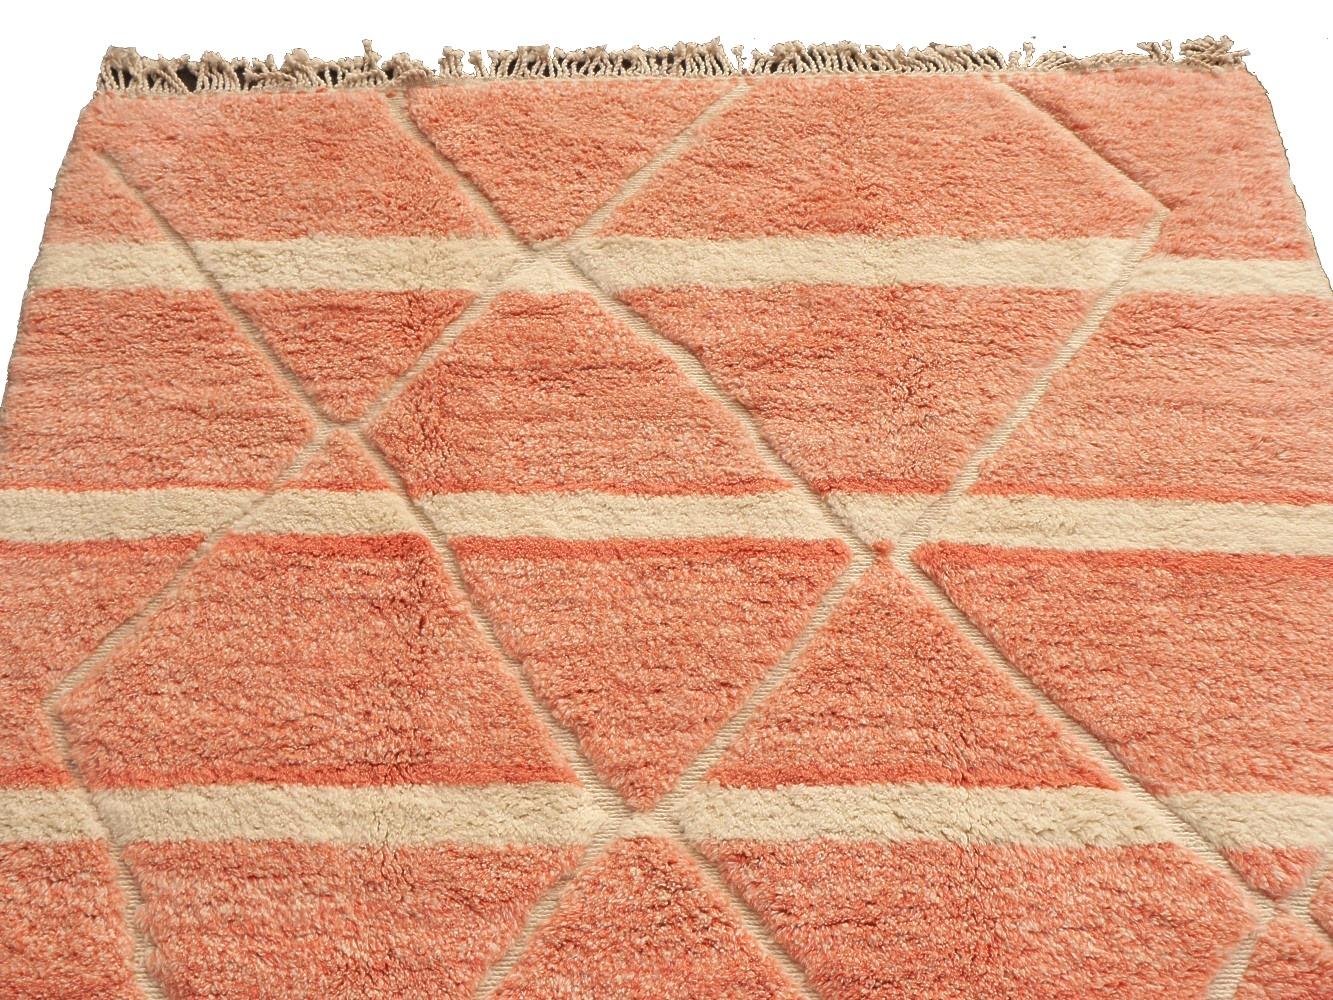 Moroccan Berber Rug Abstract Design Salmon Pink Woolwhite Stunning Quality 4